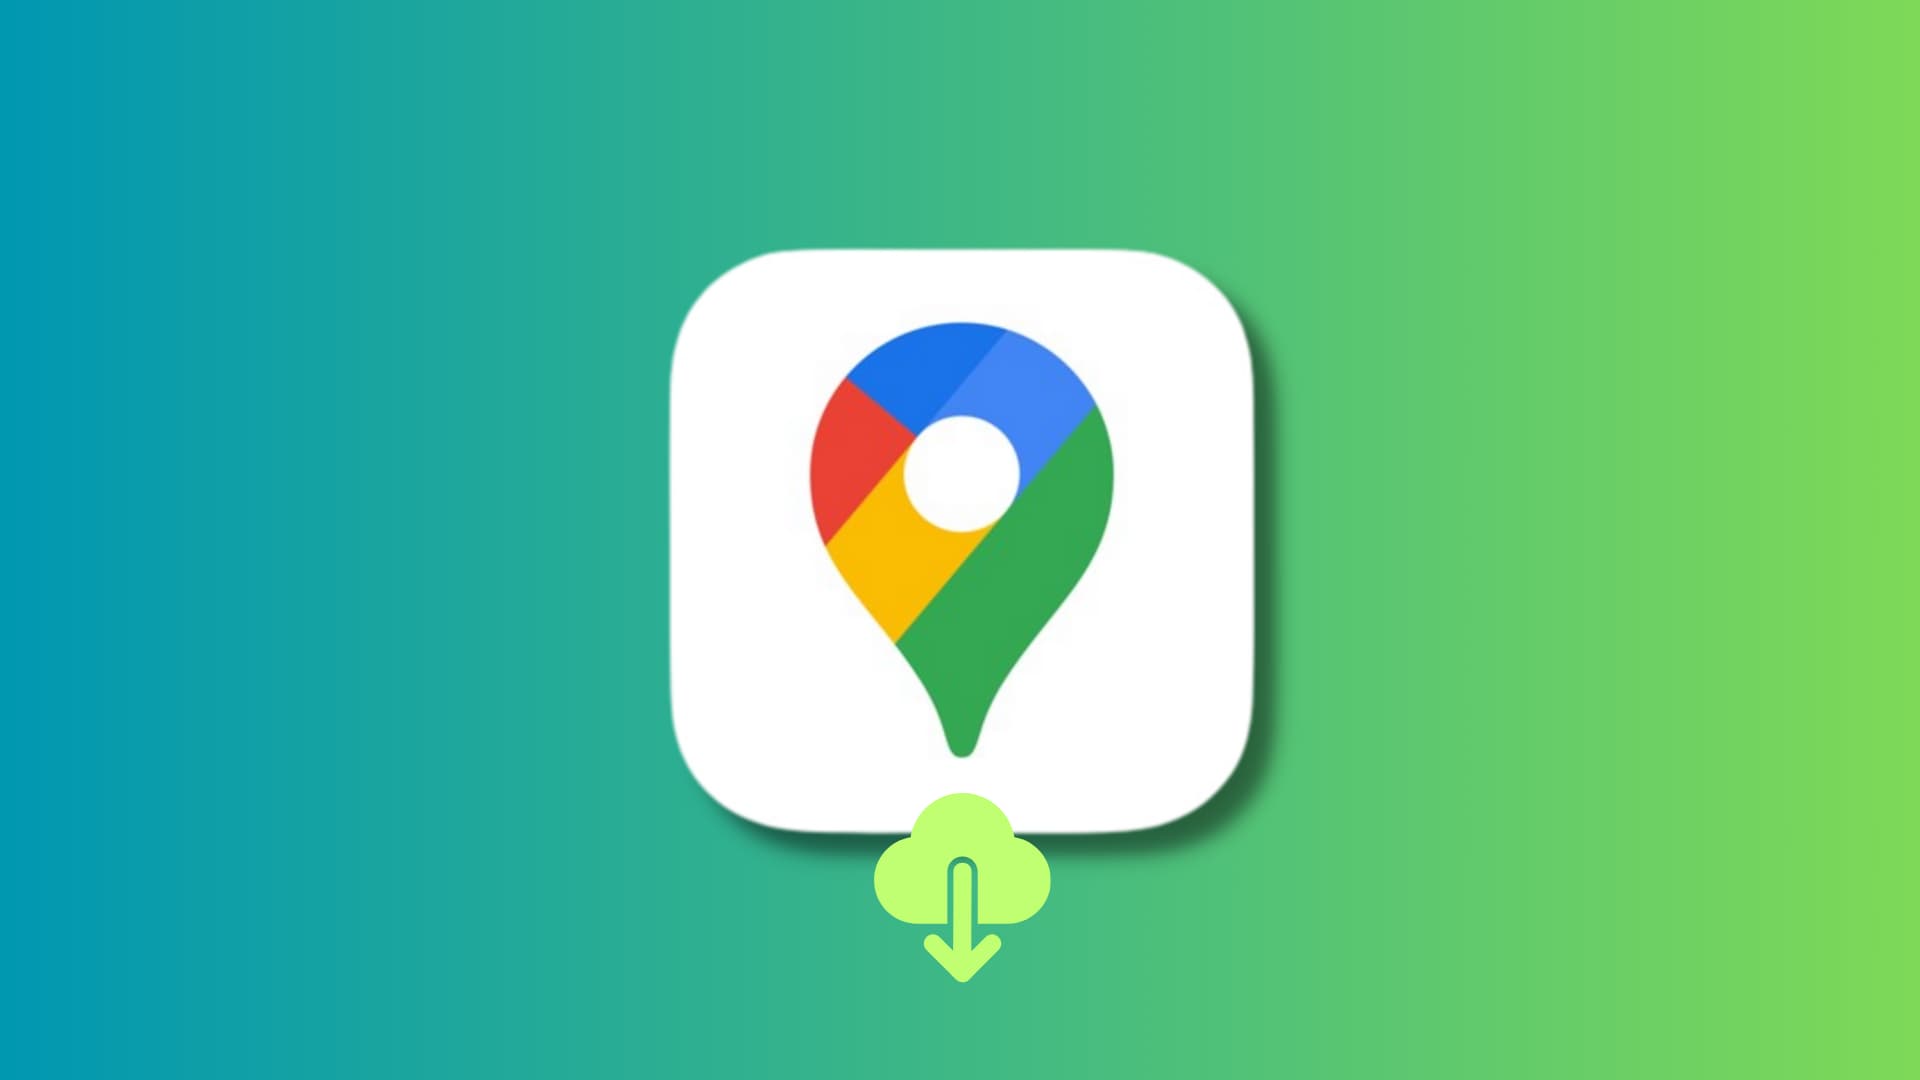 Google Maps iOS icon with a download button on a green gradient background